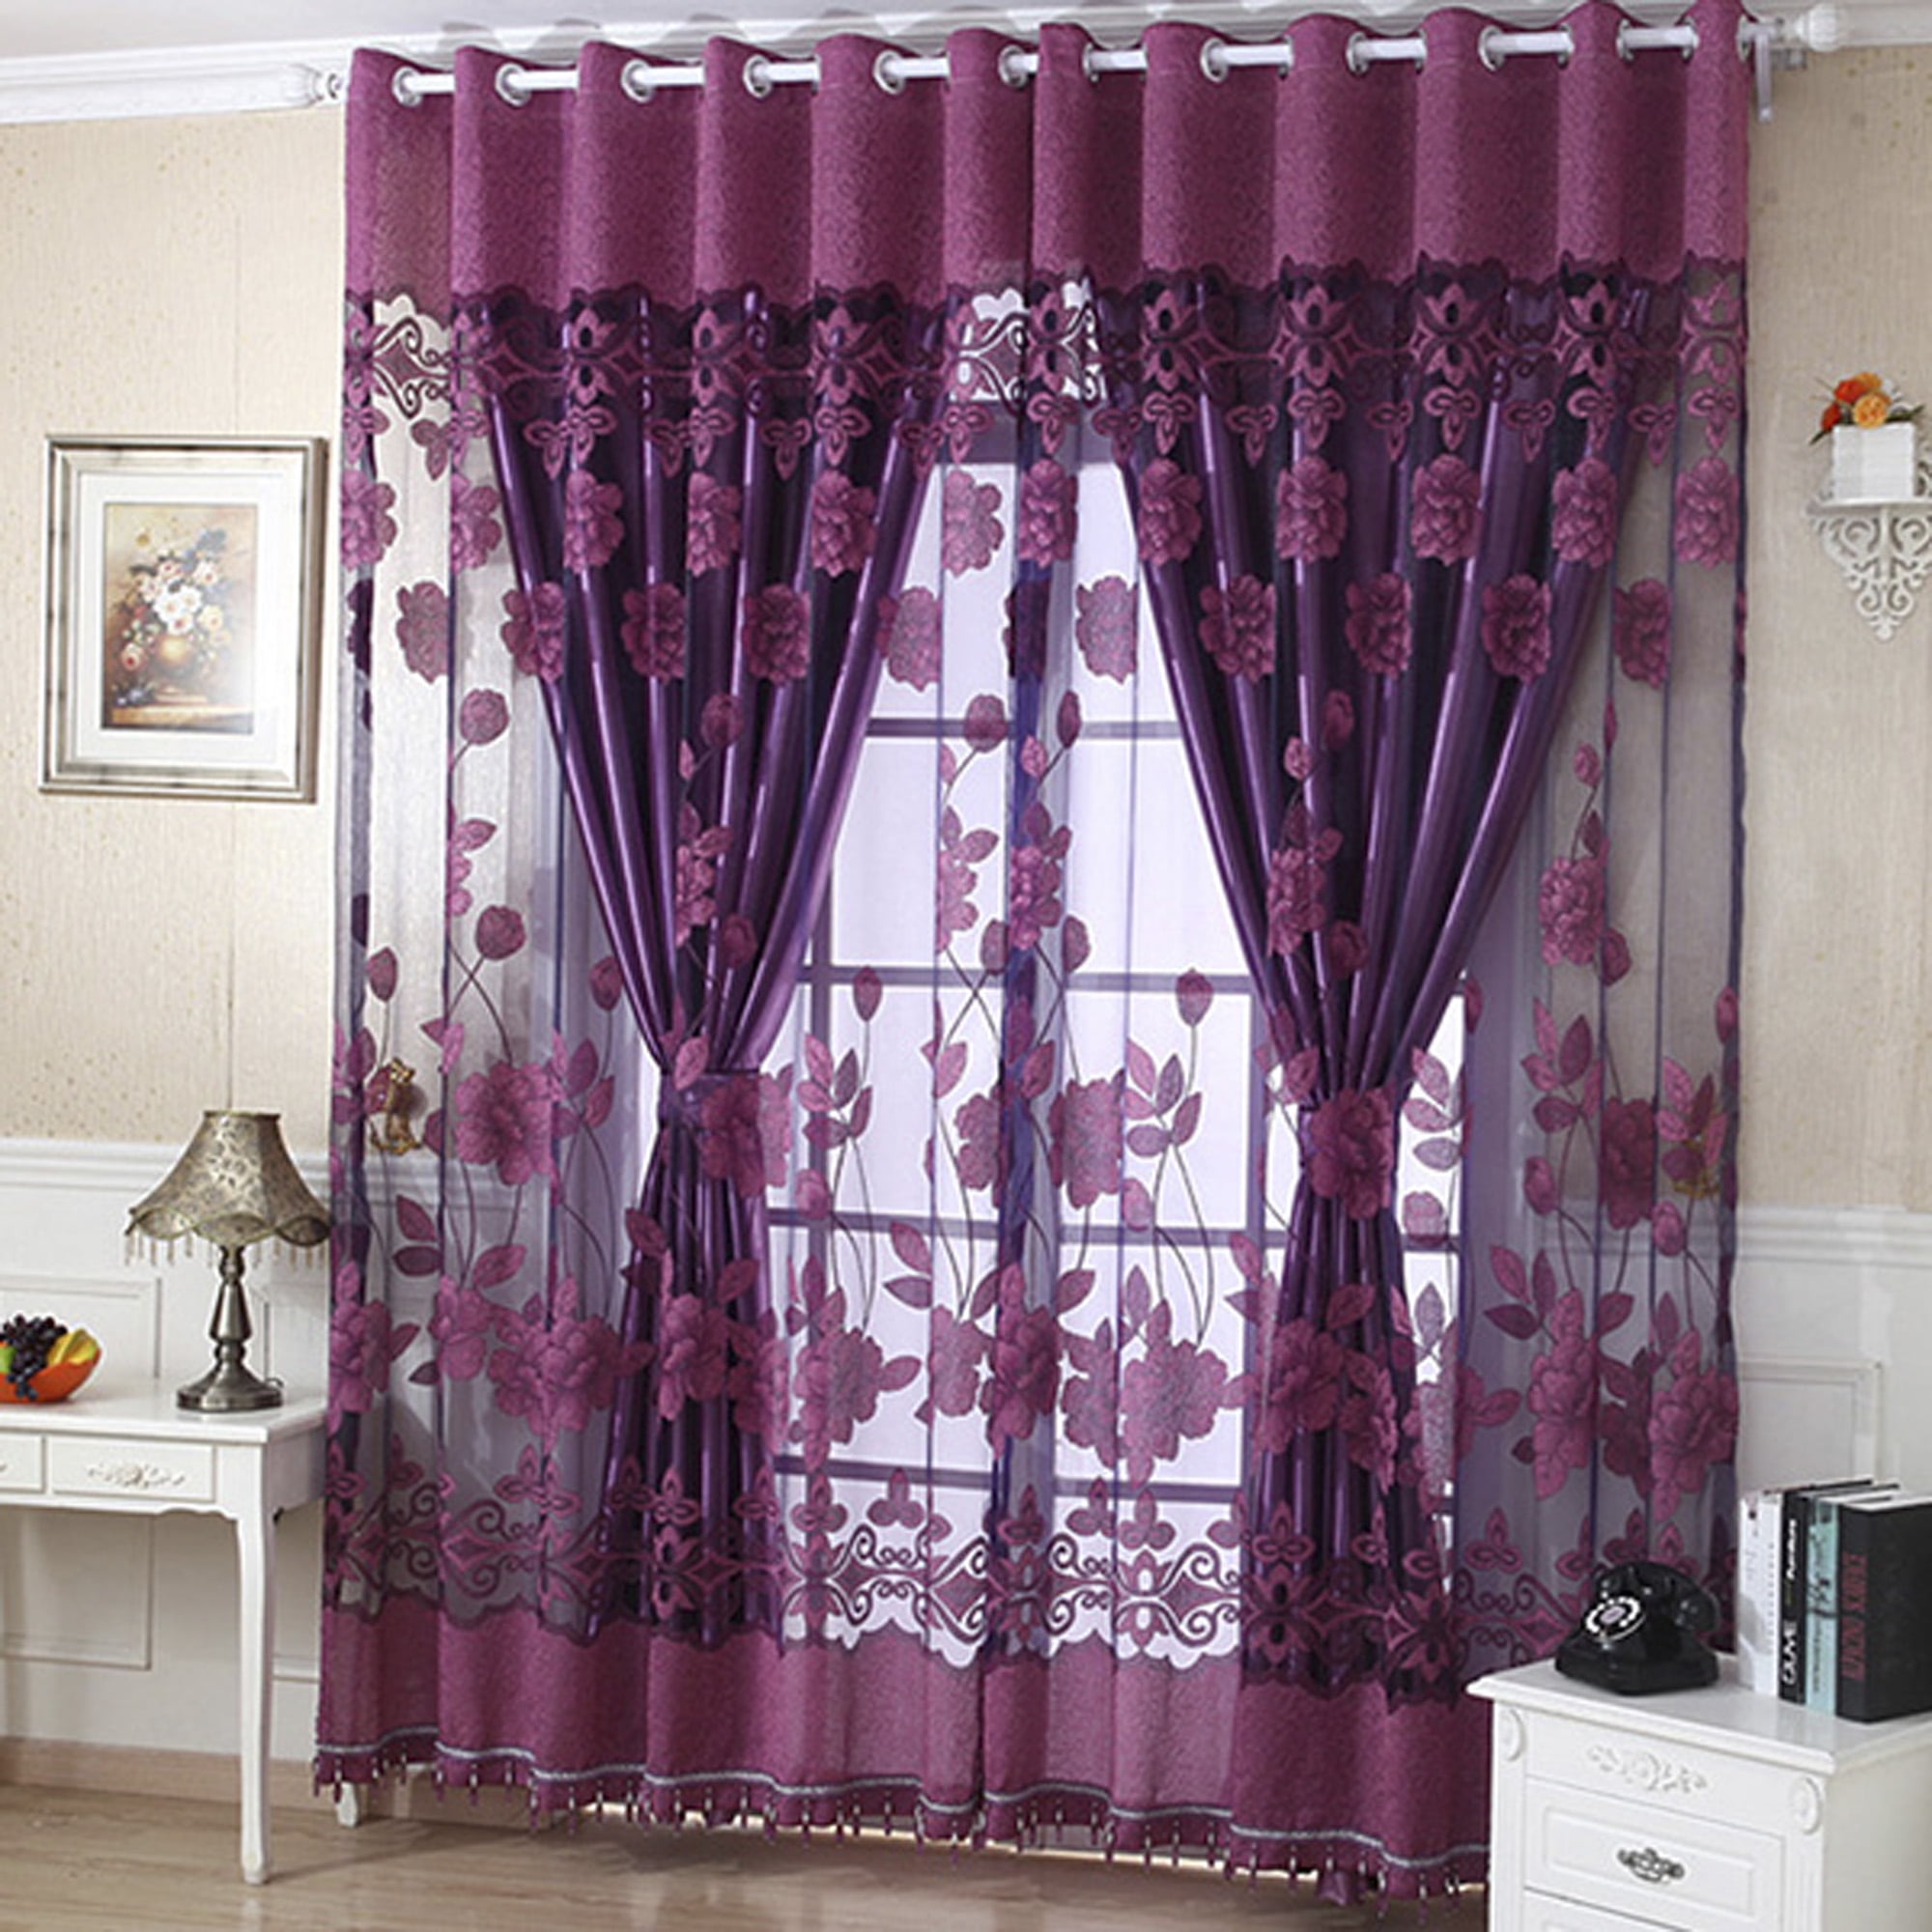 Lace Floral Door Window Curtain Room Drape Panel Voile Tulle Sheer Scarf Valance 